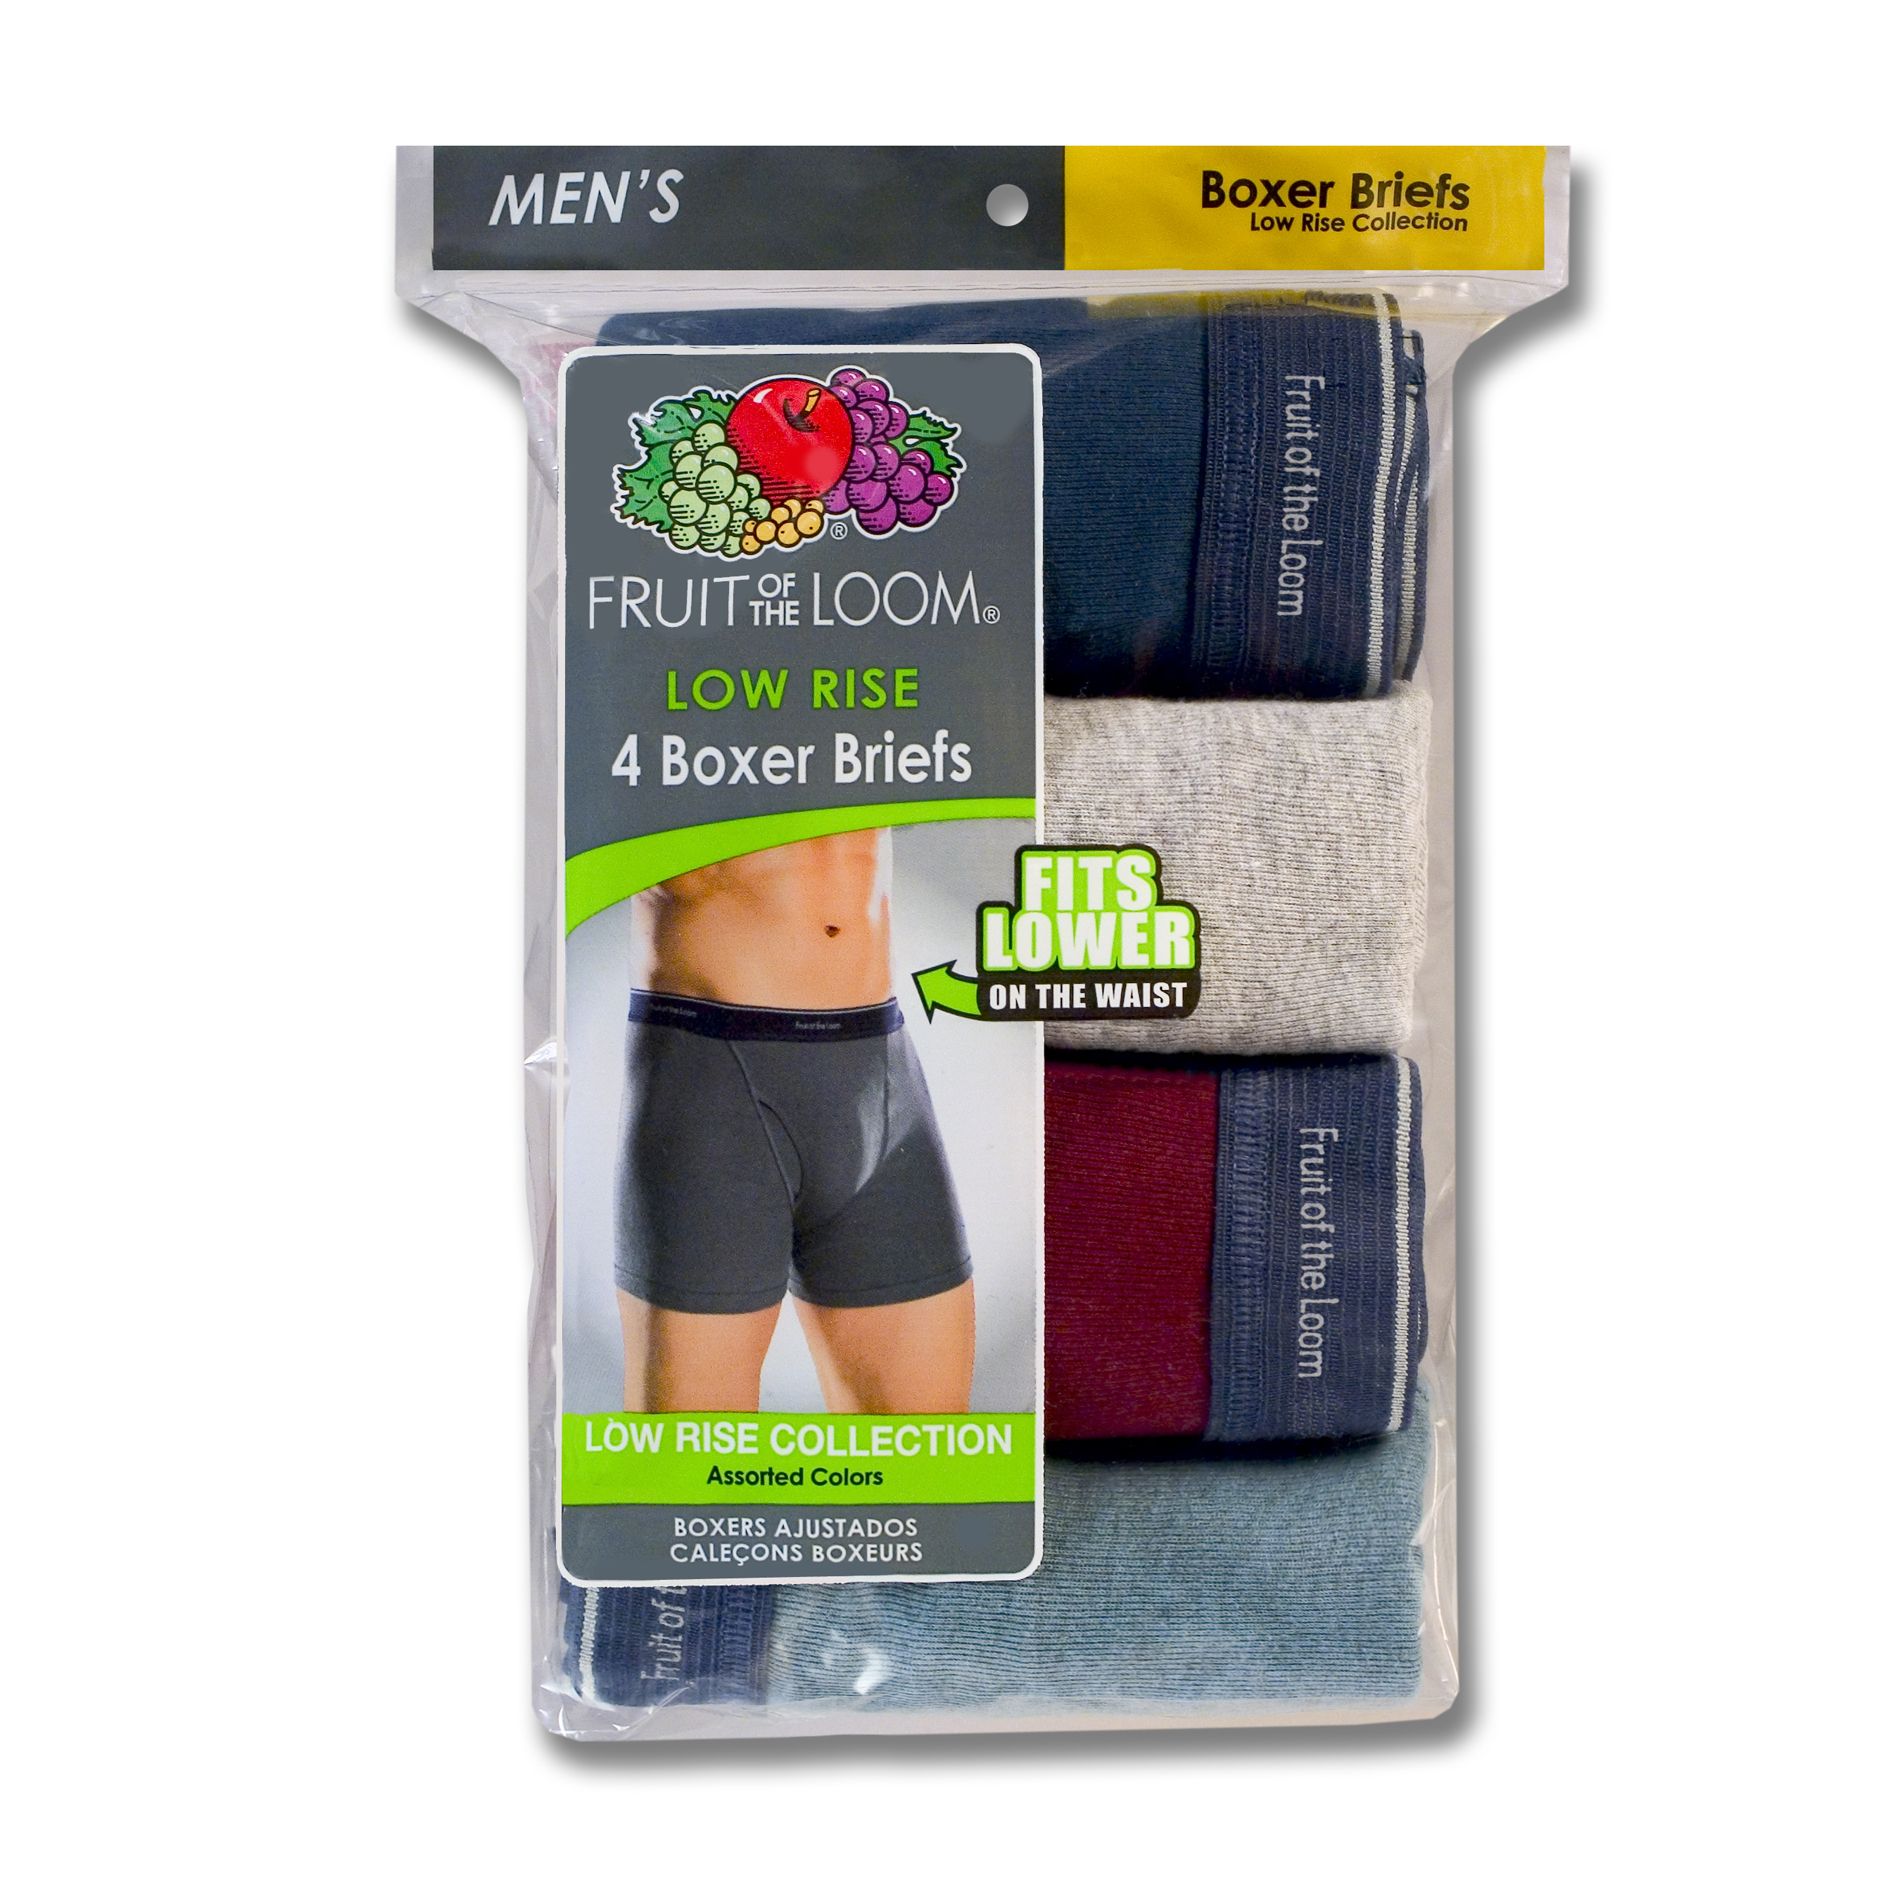 Fruit of the Loom Men's Low Rise Boxer Briefs - Assorted 4 Pack